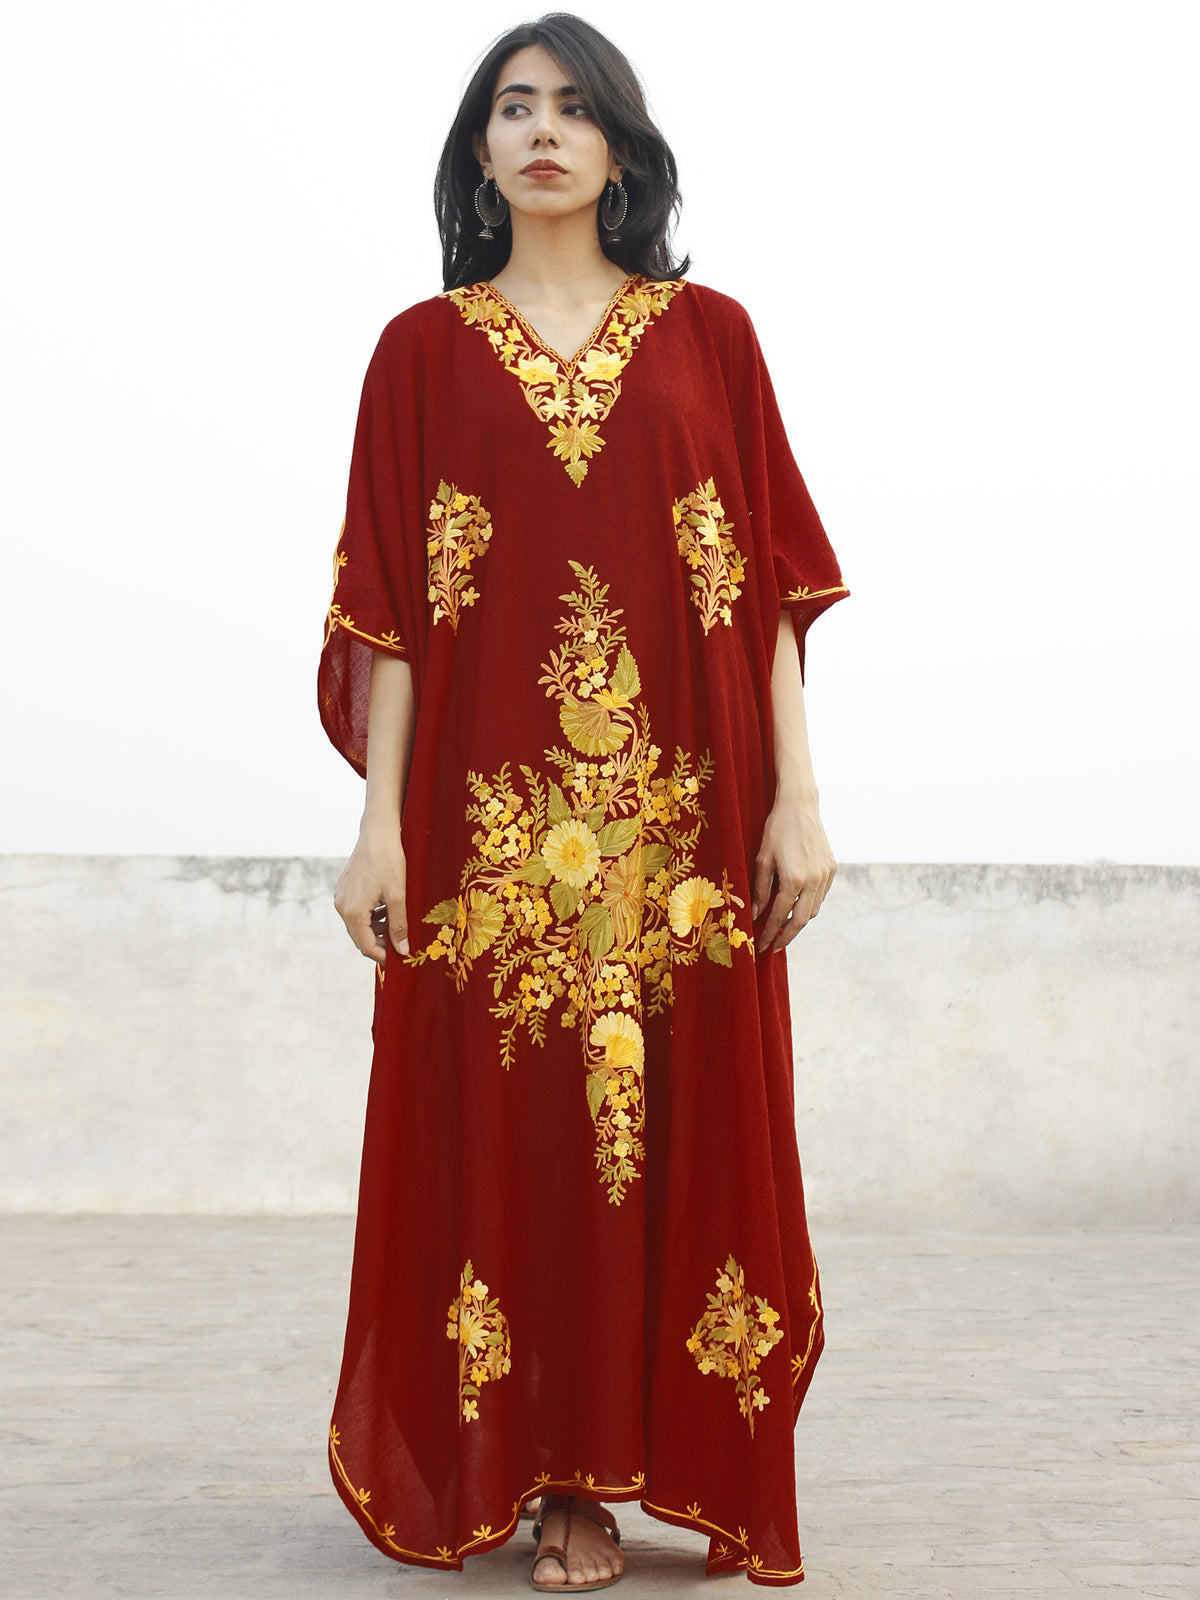 Maroon Red & Golden Yellow Aari Embroidered Long Kashmere Free Size Kaftan in Crushed Cotton - K11K018